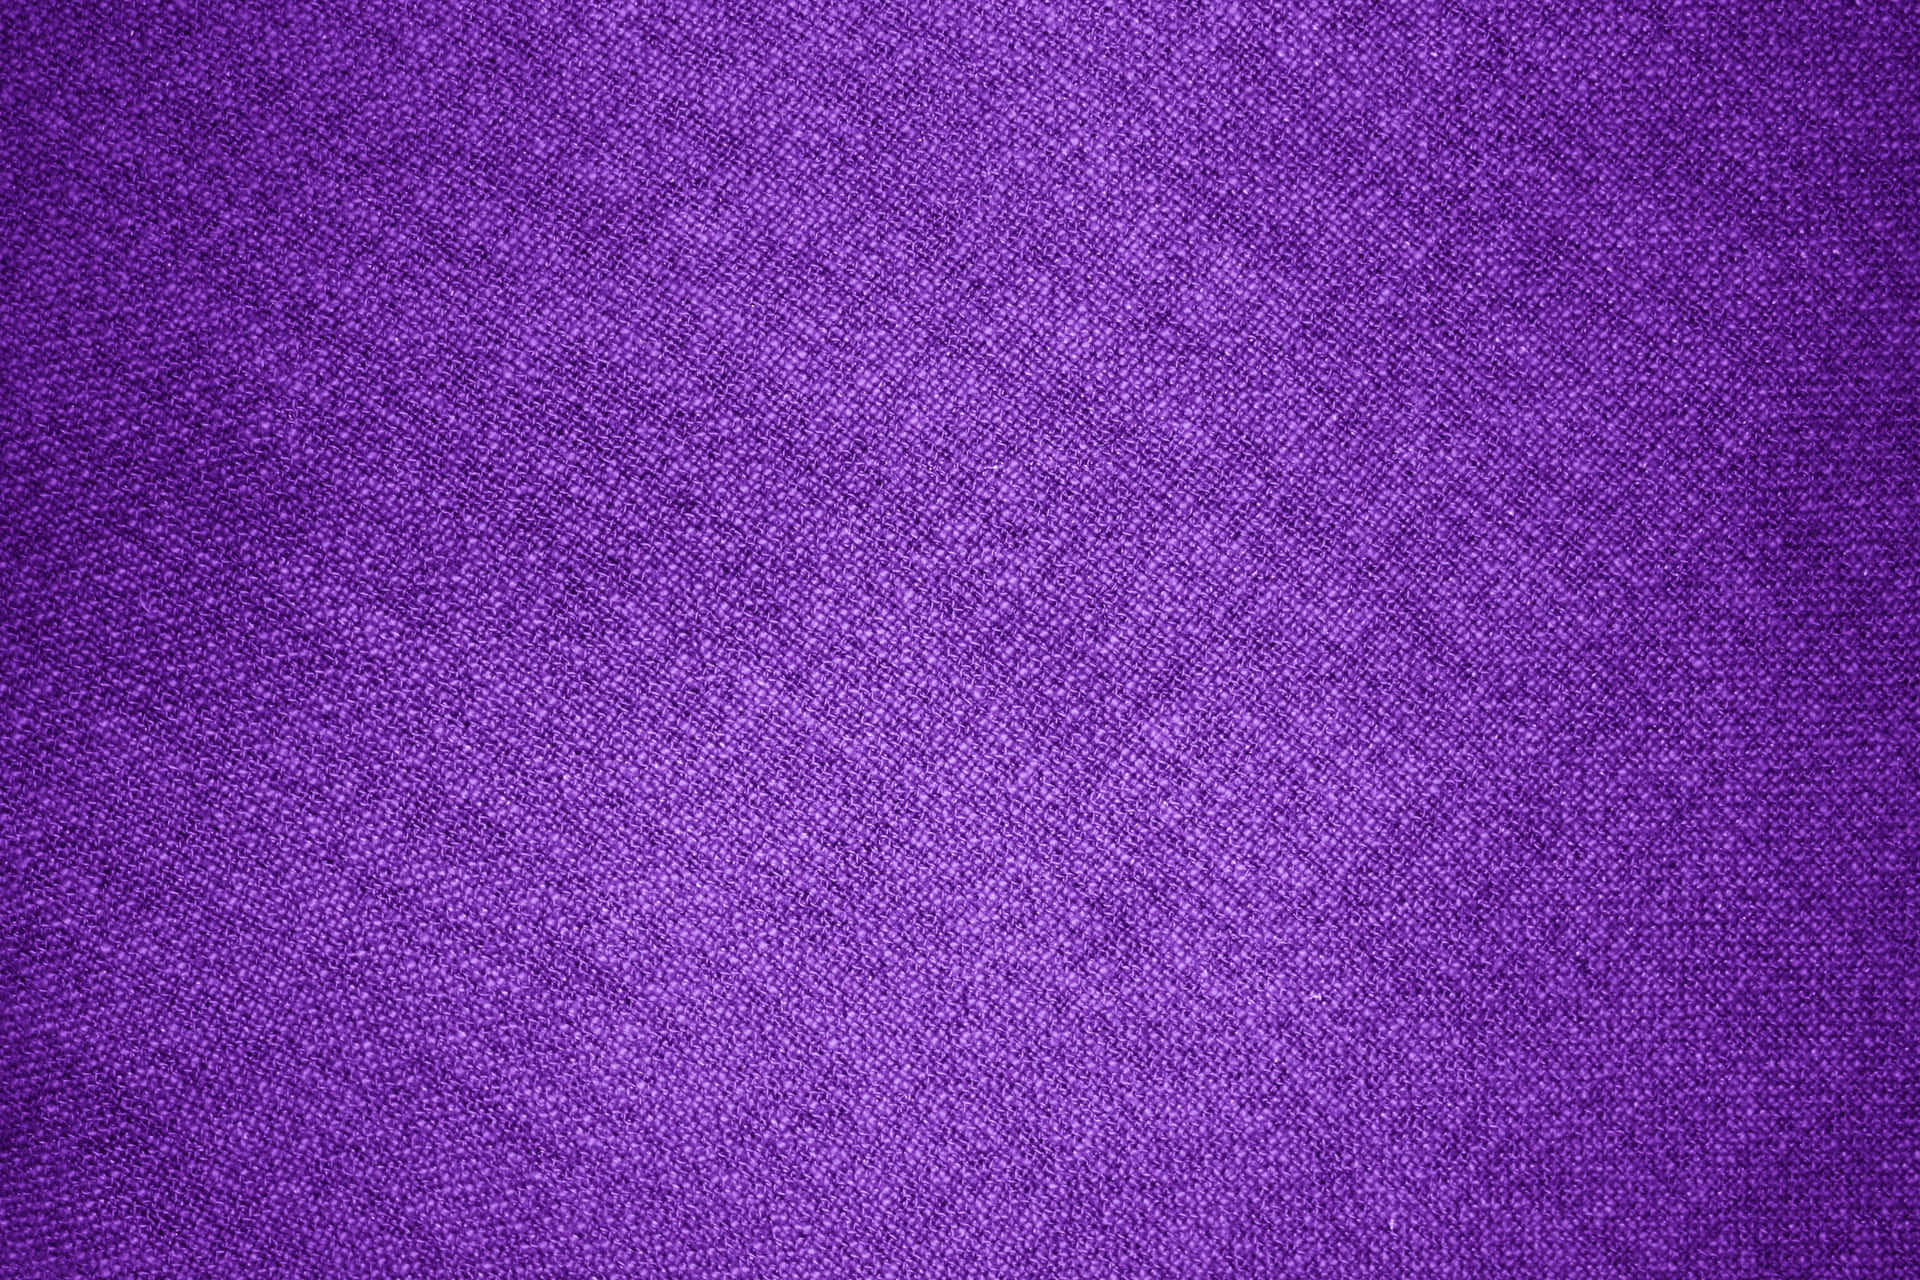 Textures For Photoshop Purple Fabric Wallpaper